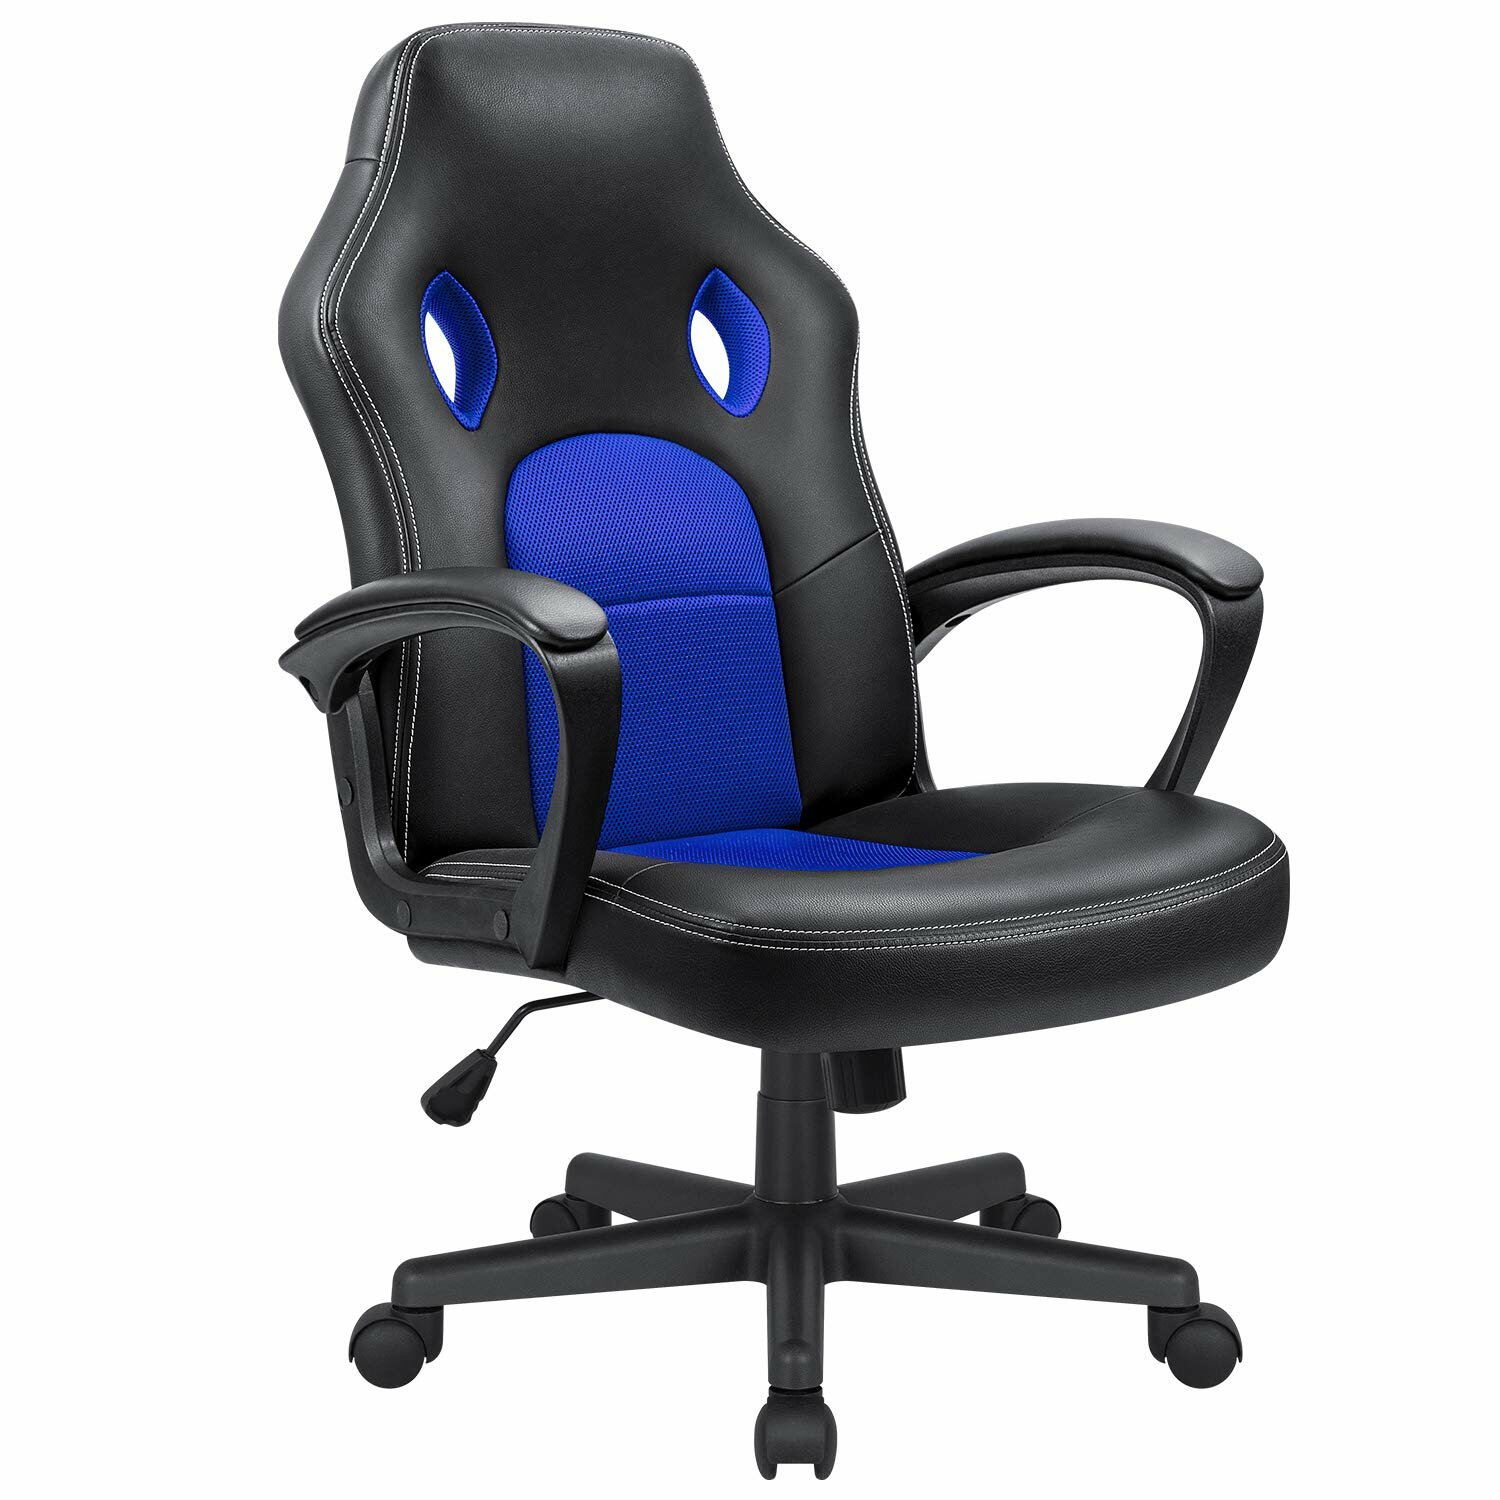 KCream Gaming Chair Review - This One Surprised Us - Ergonomic Trends